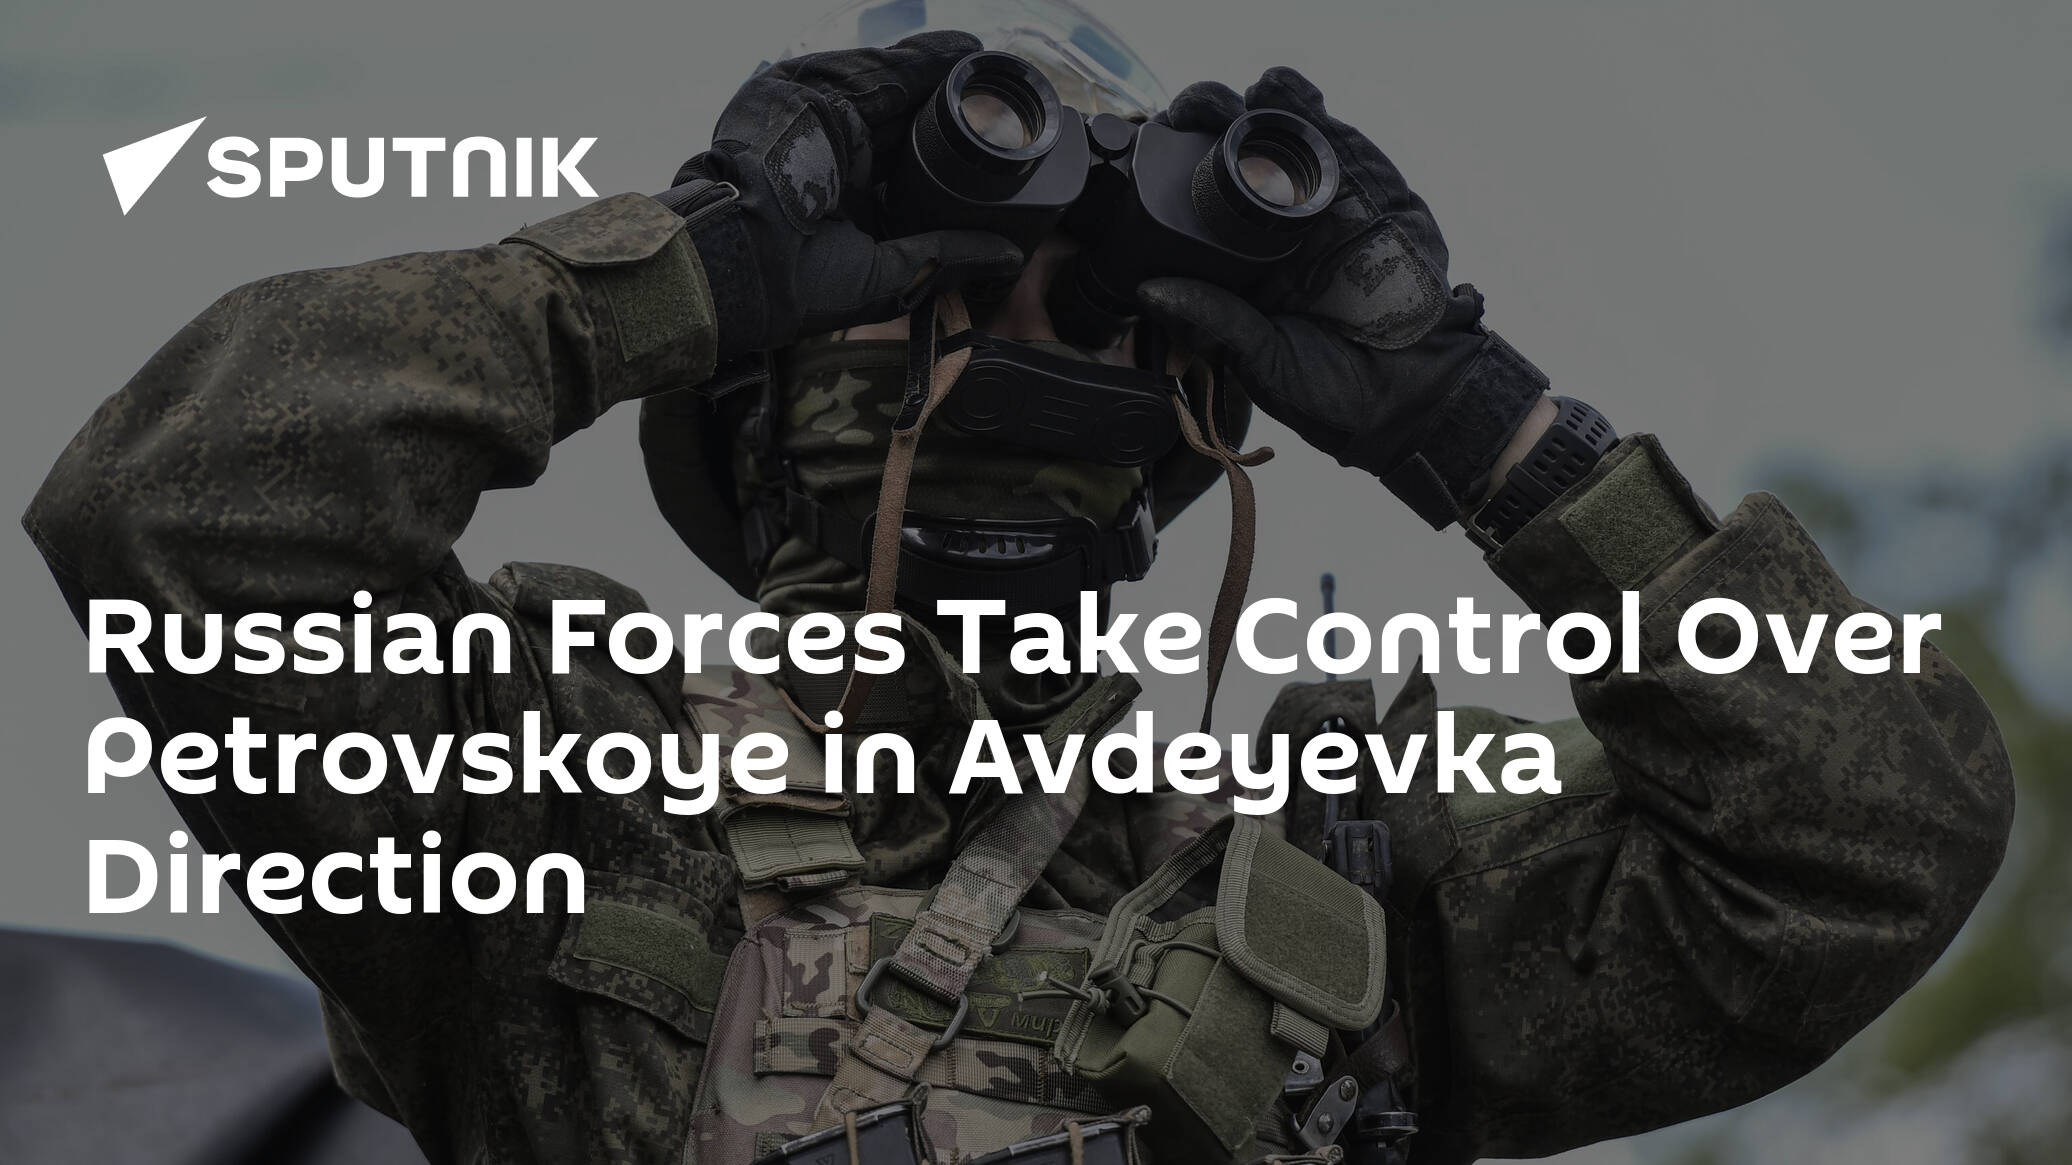 Russian Forces Take Control Over Petrovskoye in Avdeyevka Direction